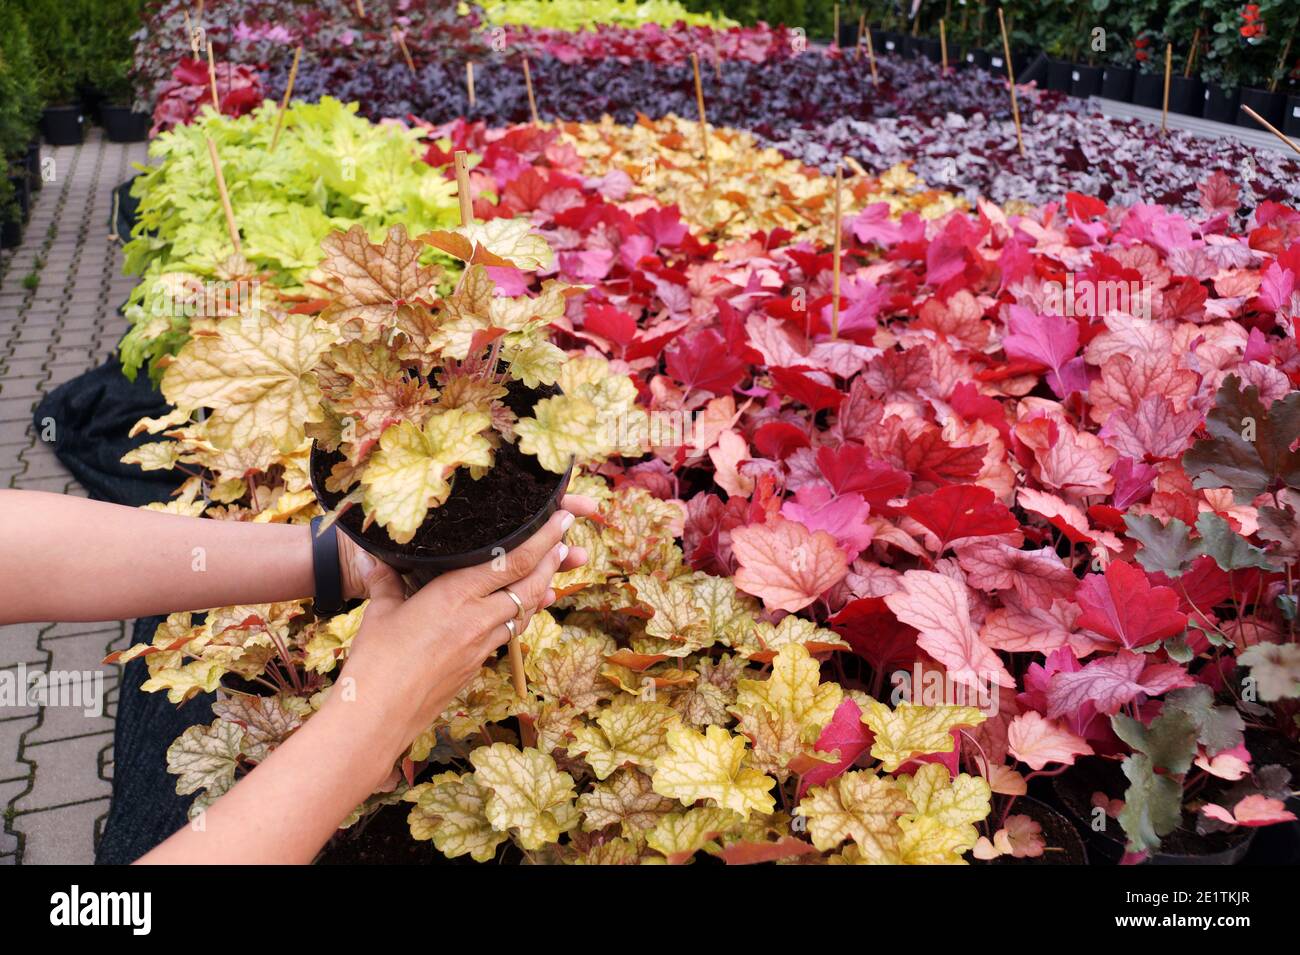 Garden shop. Heucherella, an extremely popular, evergreen garden plant. Heucherella and Tiarella crossword. It occurs in many colors and shapes of lea Stock Photo